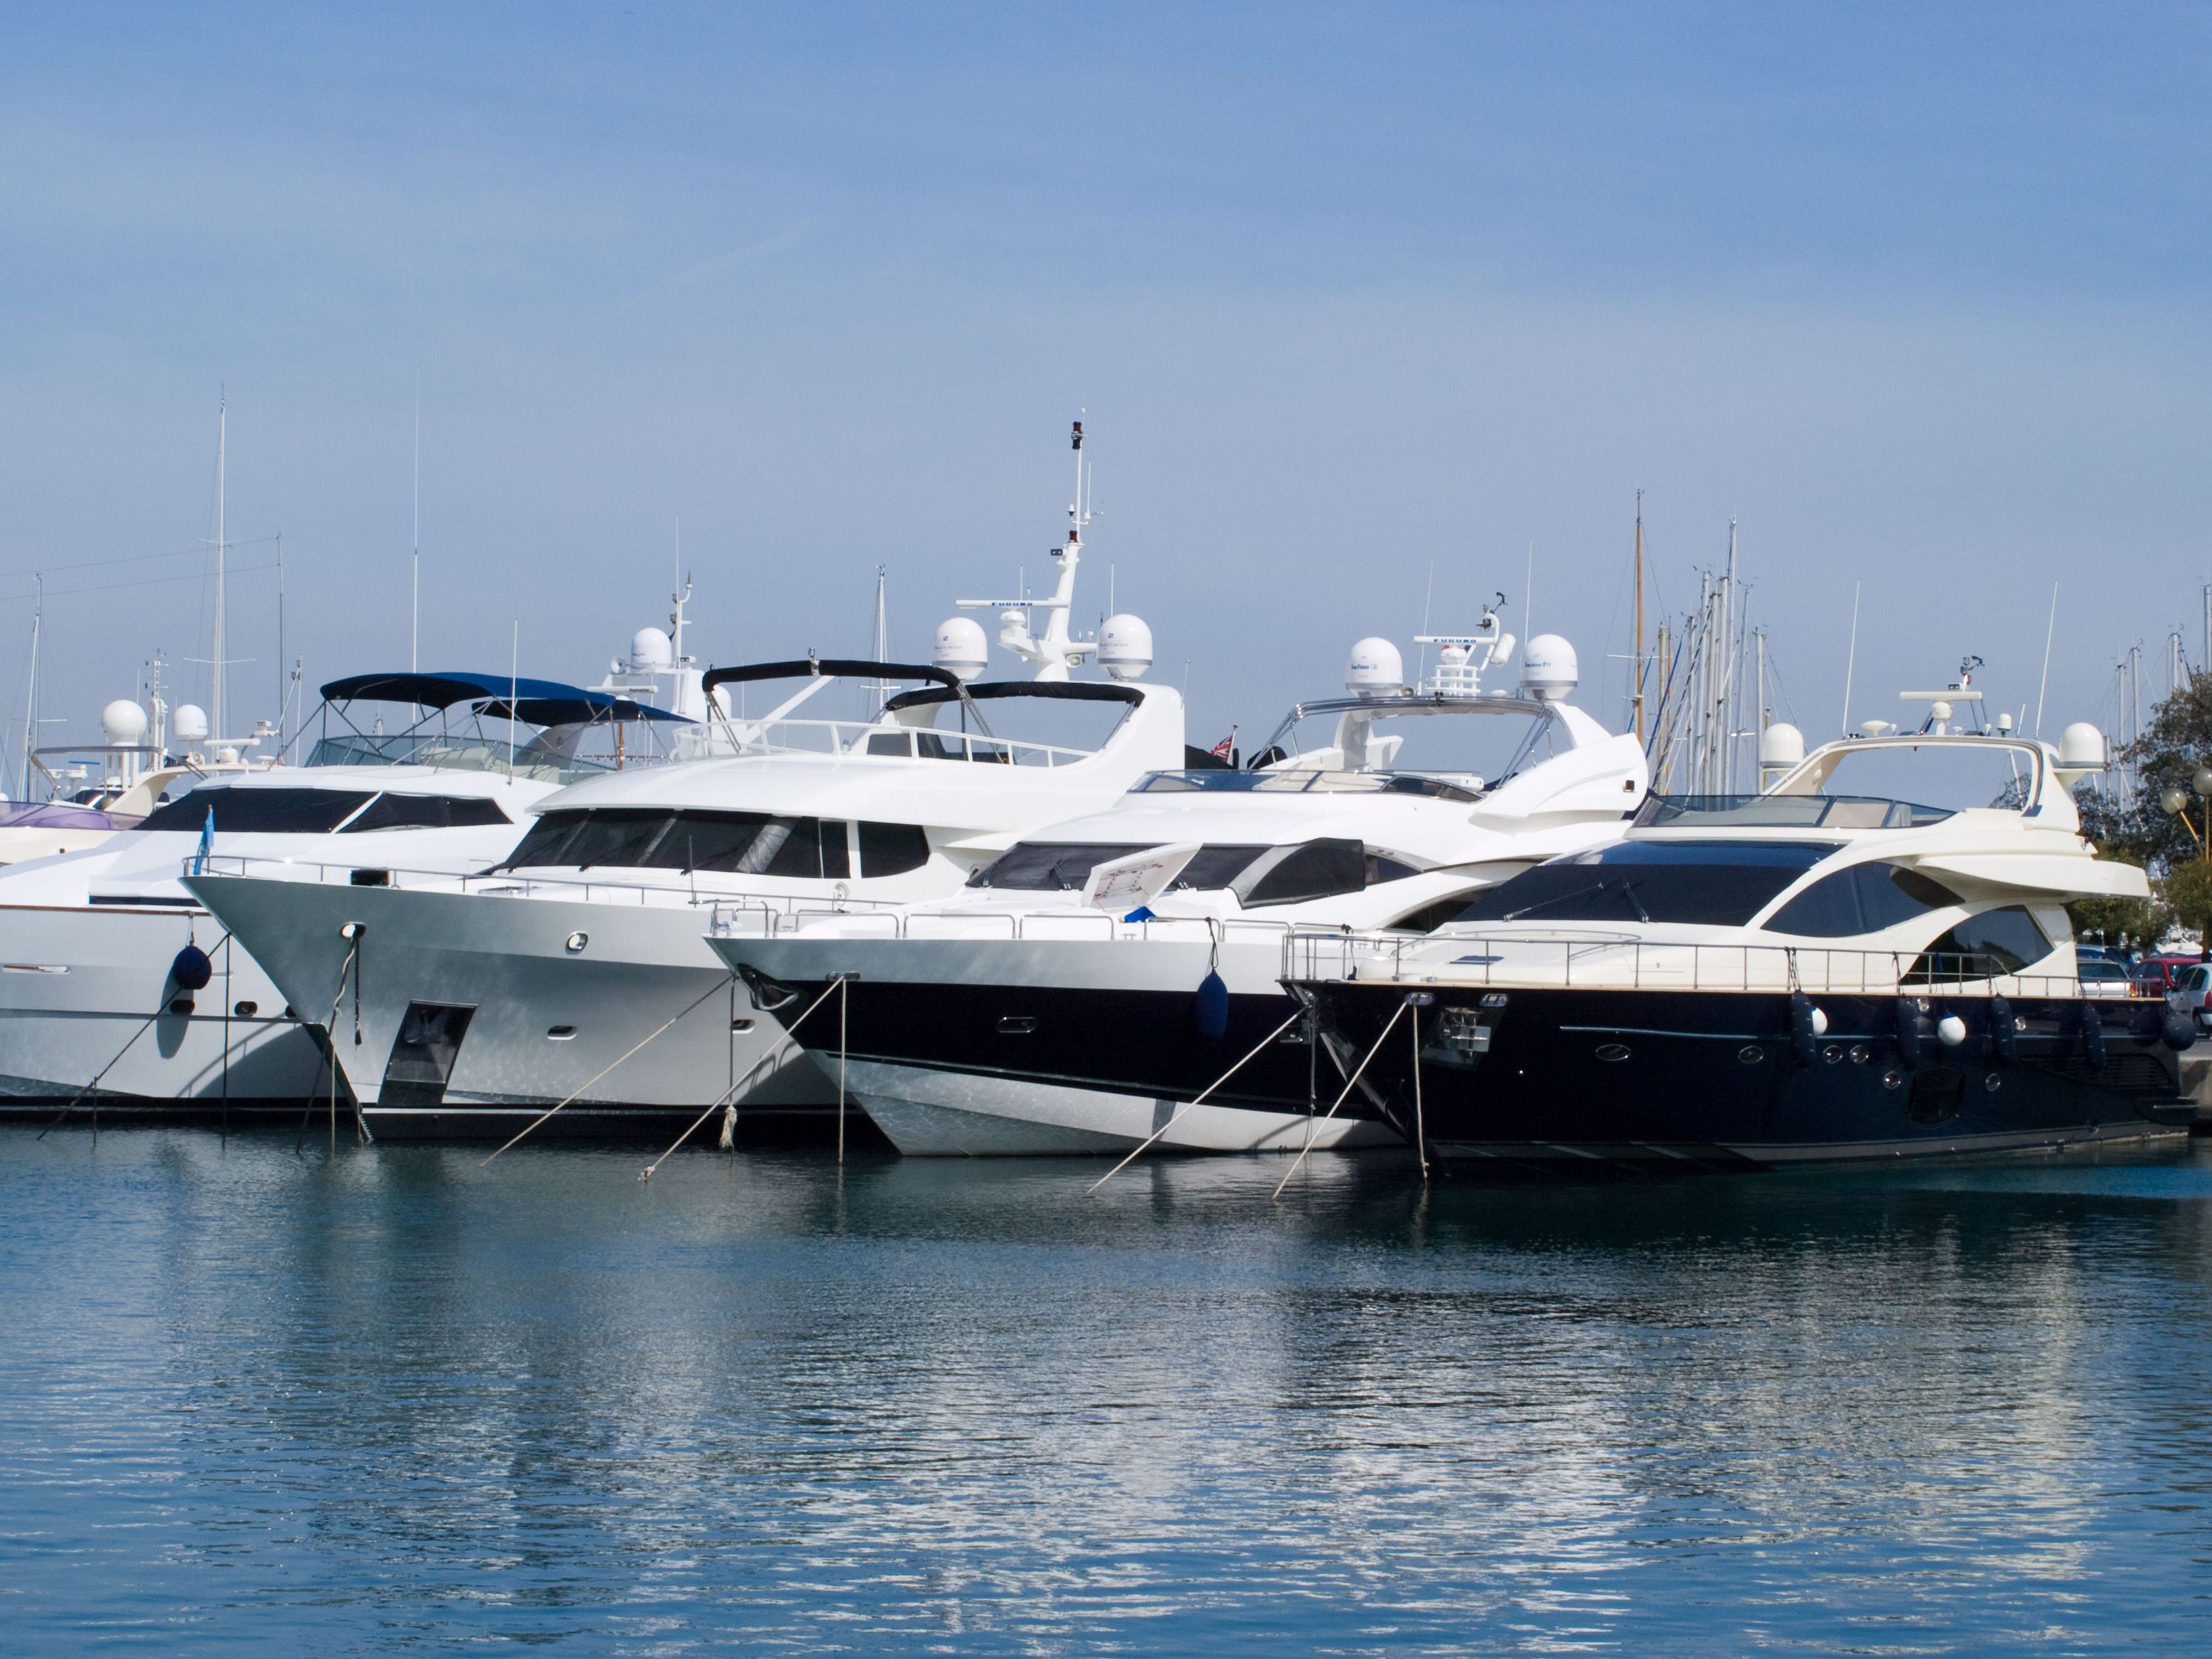 Why Visit Boat Dealers in Anne Arundel County?